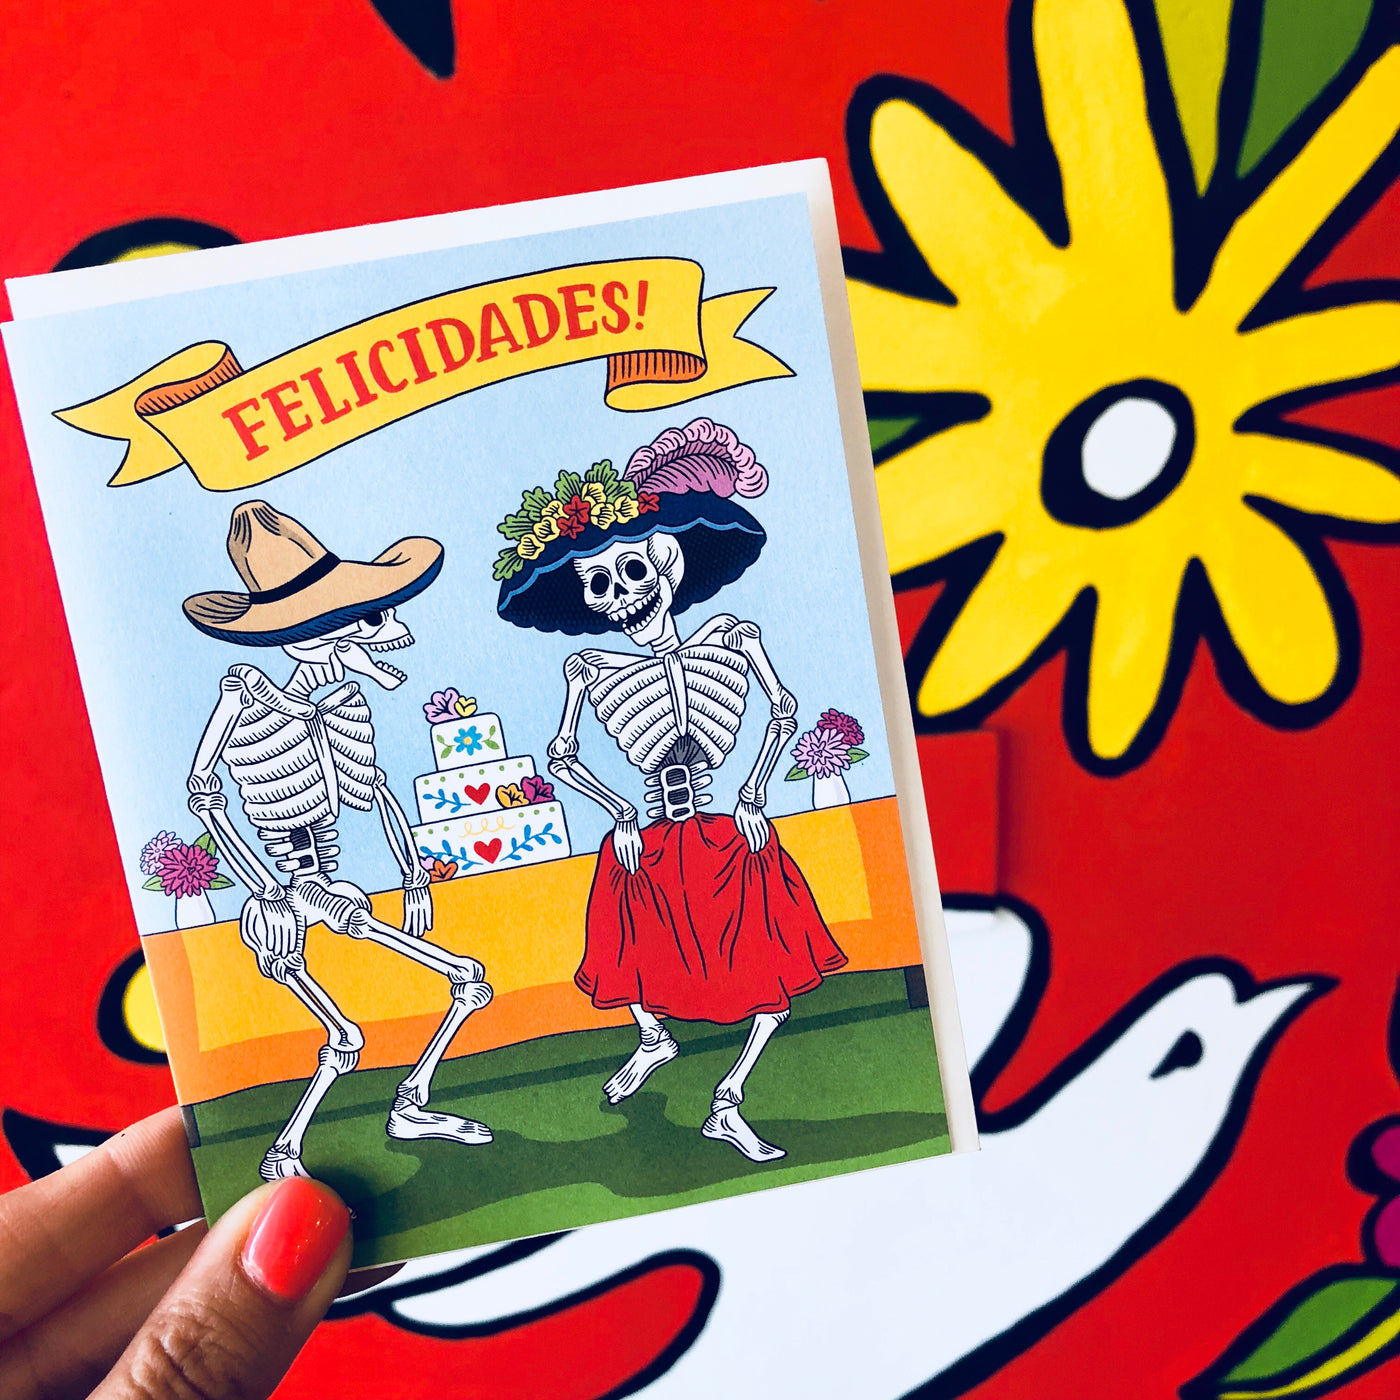 Felicidades Congratulations card are with two dancing skeletons in front of a wedding cake